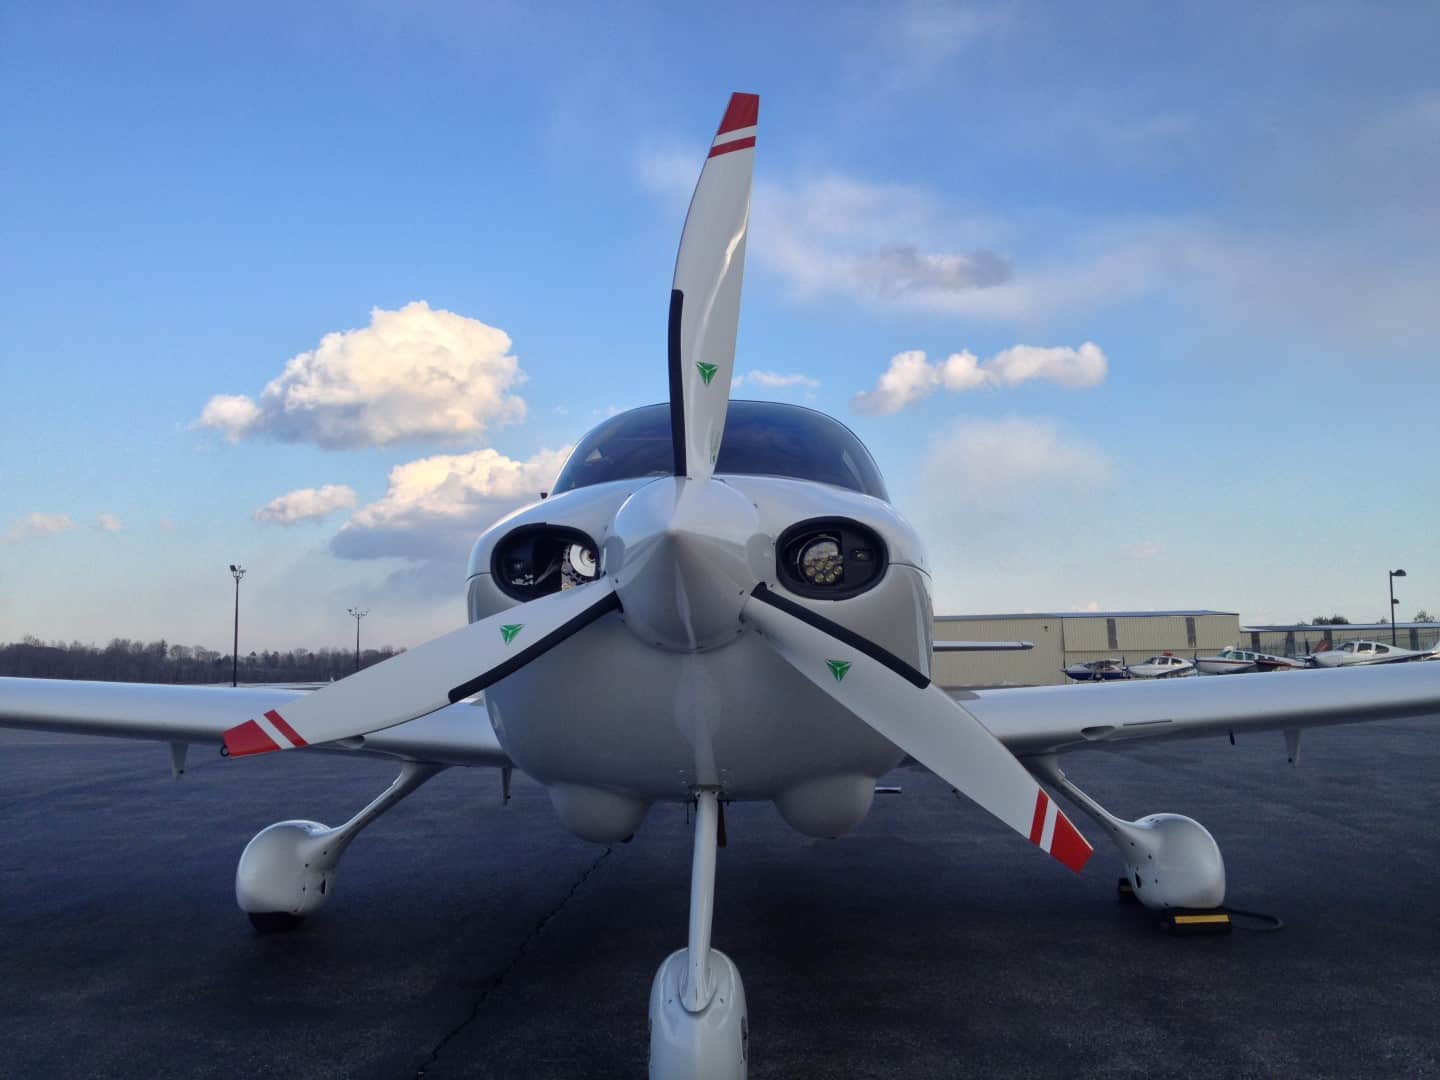 MT Composite Propeller in White for the Cirrus SR20